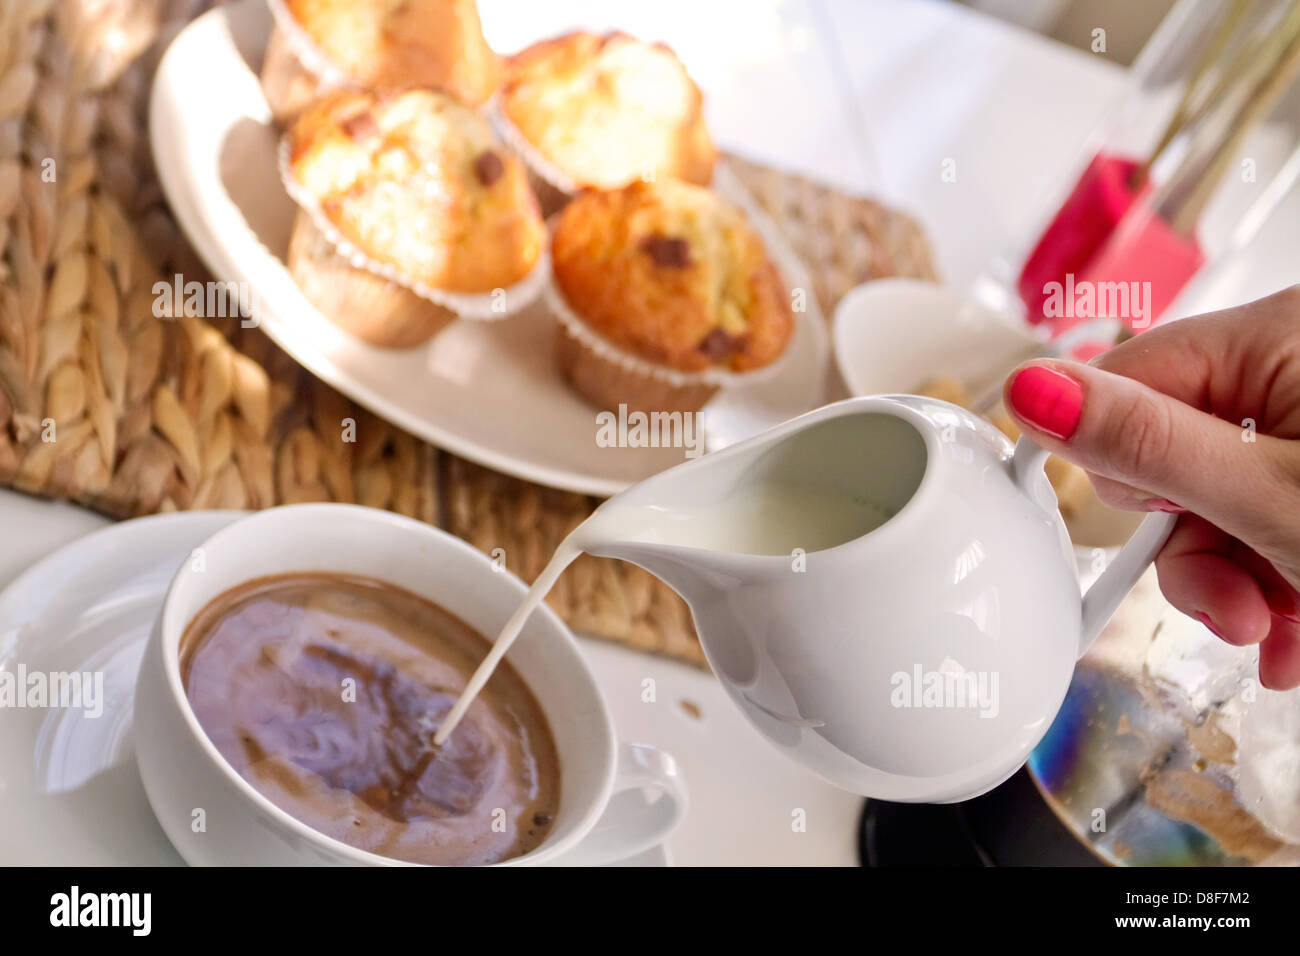 coffee and muffins tabel Stock Photo